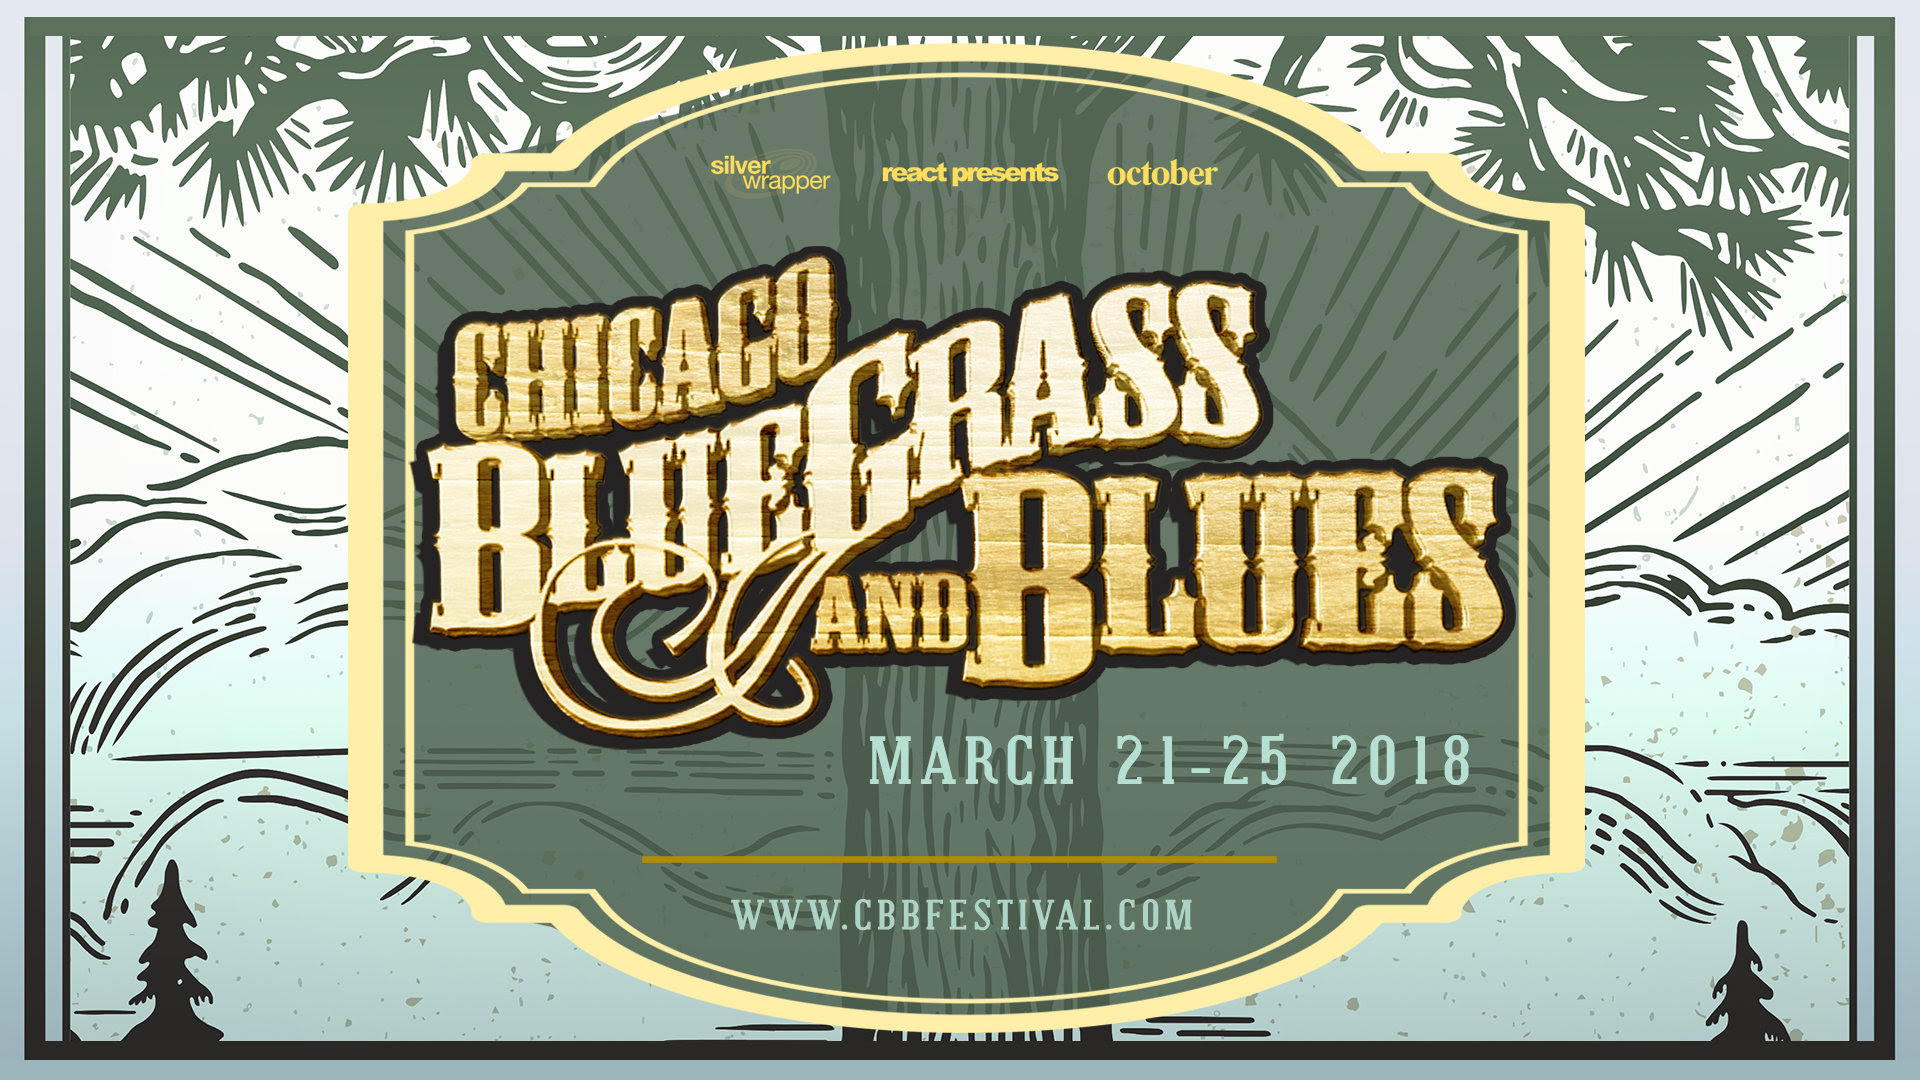 Chicago Bluegrass & Blues 2018. Photo provided.